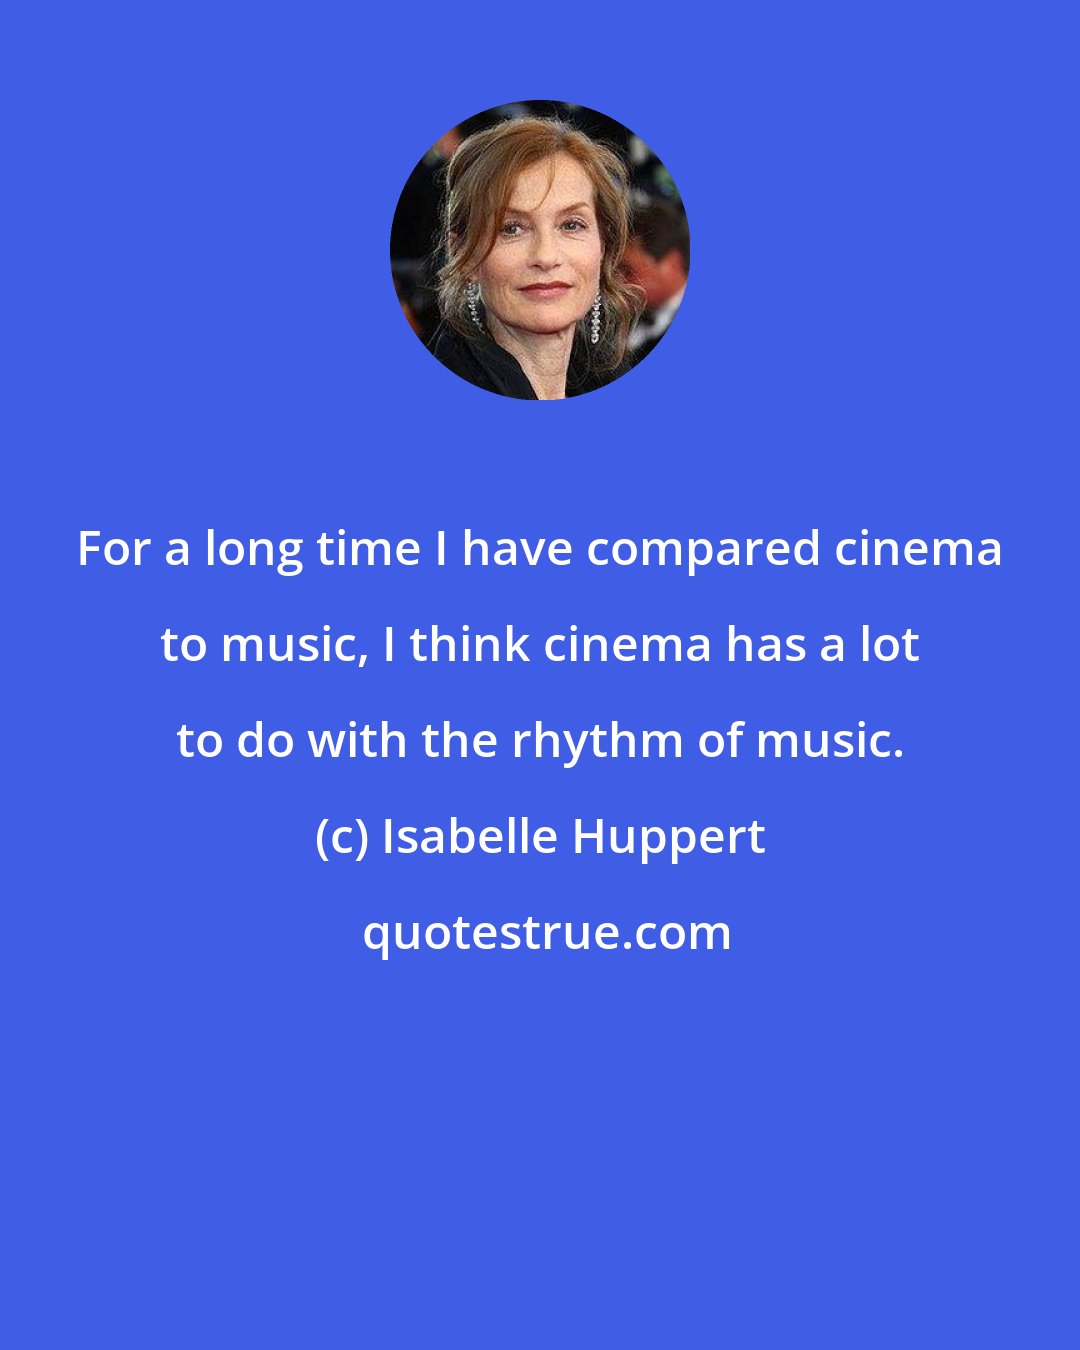 Isabelle Huppert: For a long time I have compared cinema to music, I think cinema has a lot to do with the rhythm of music.